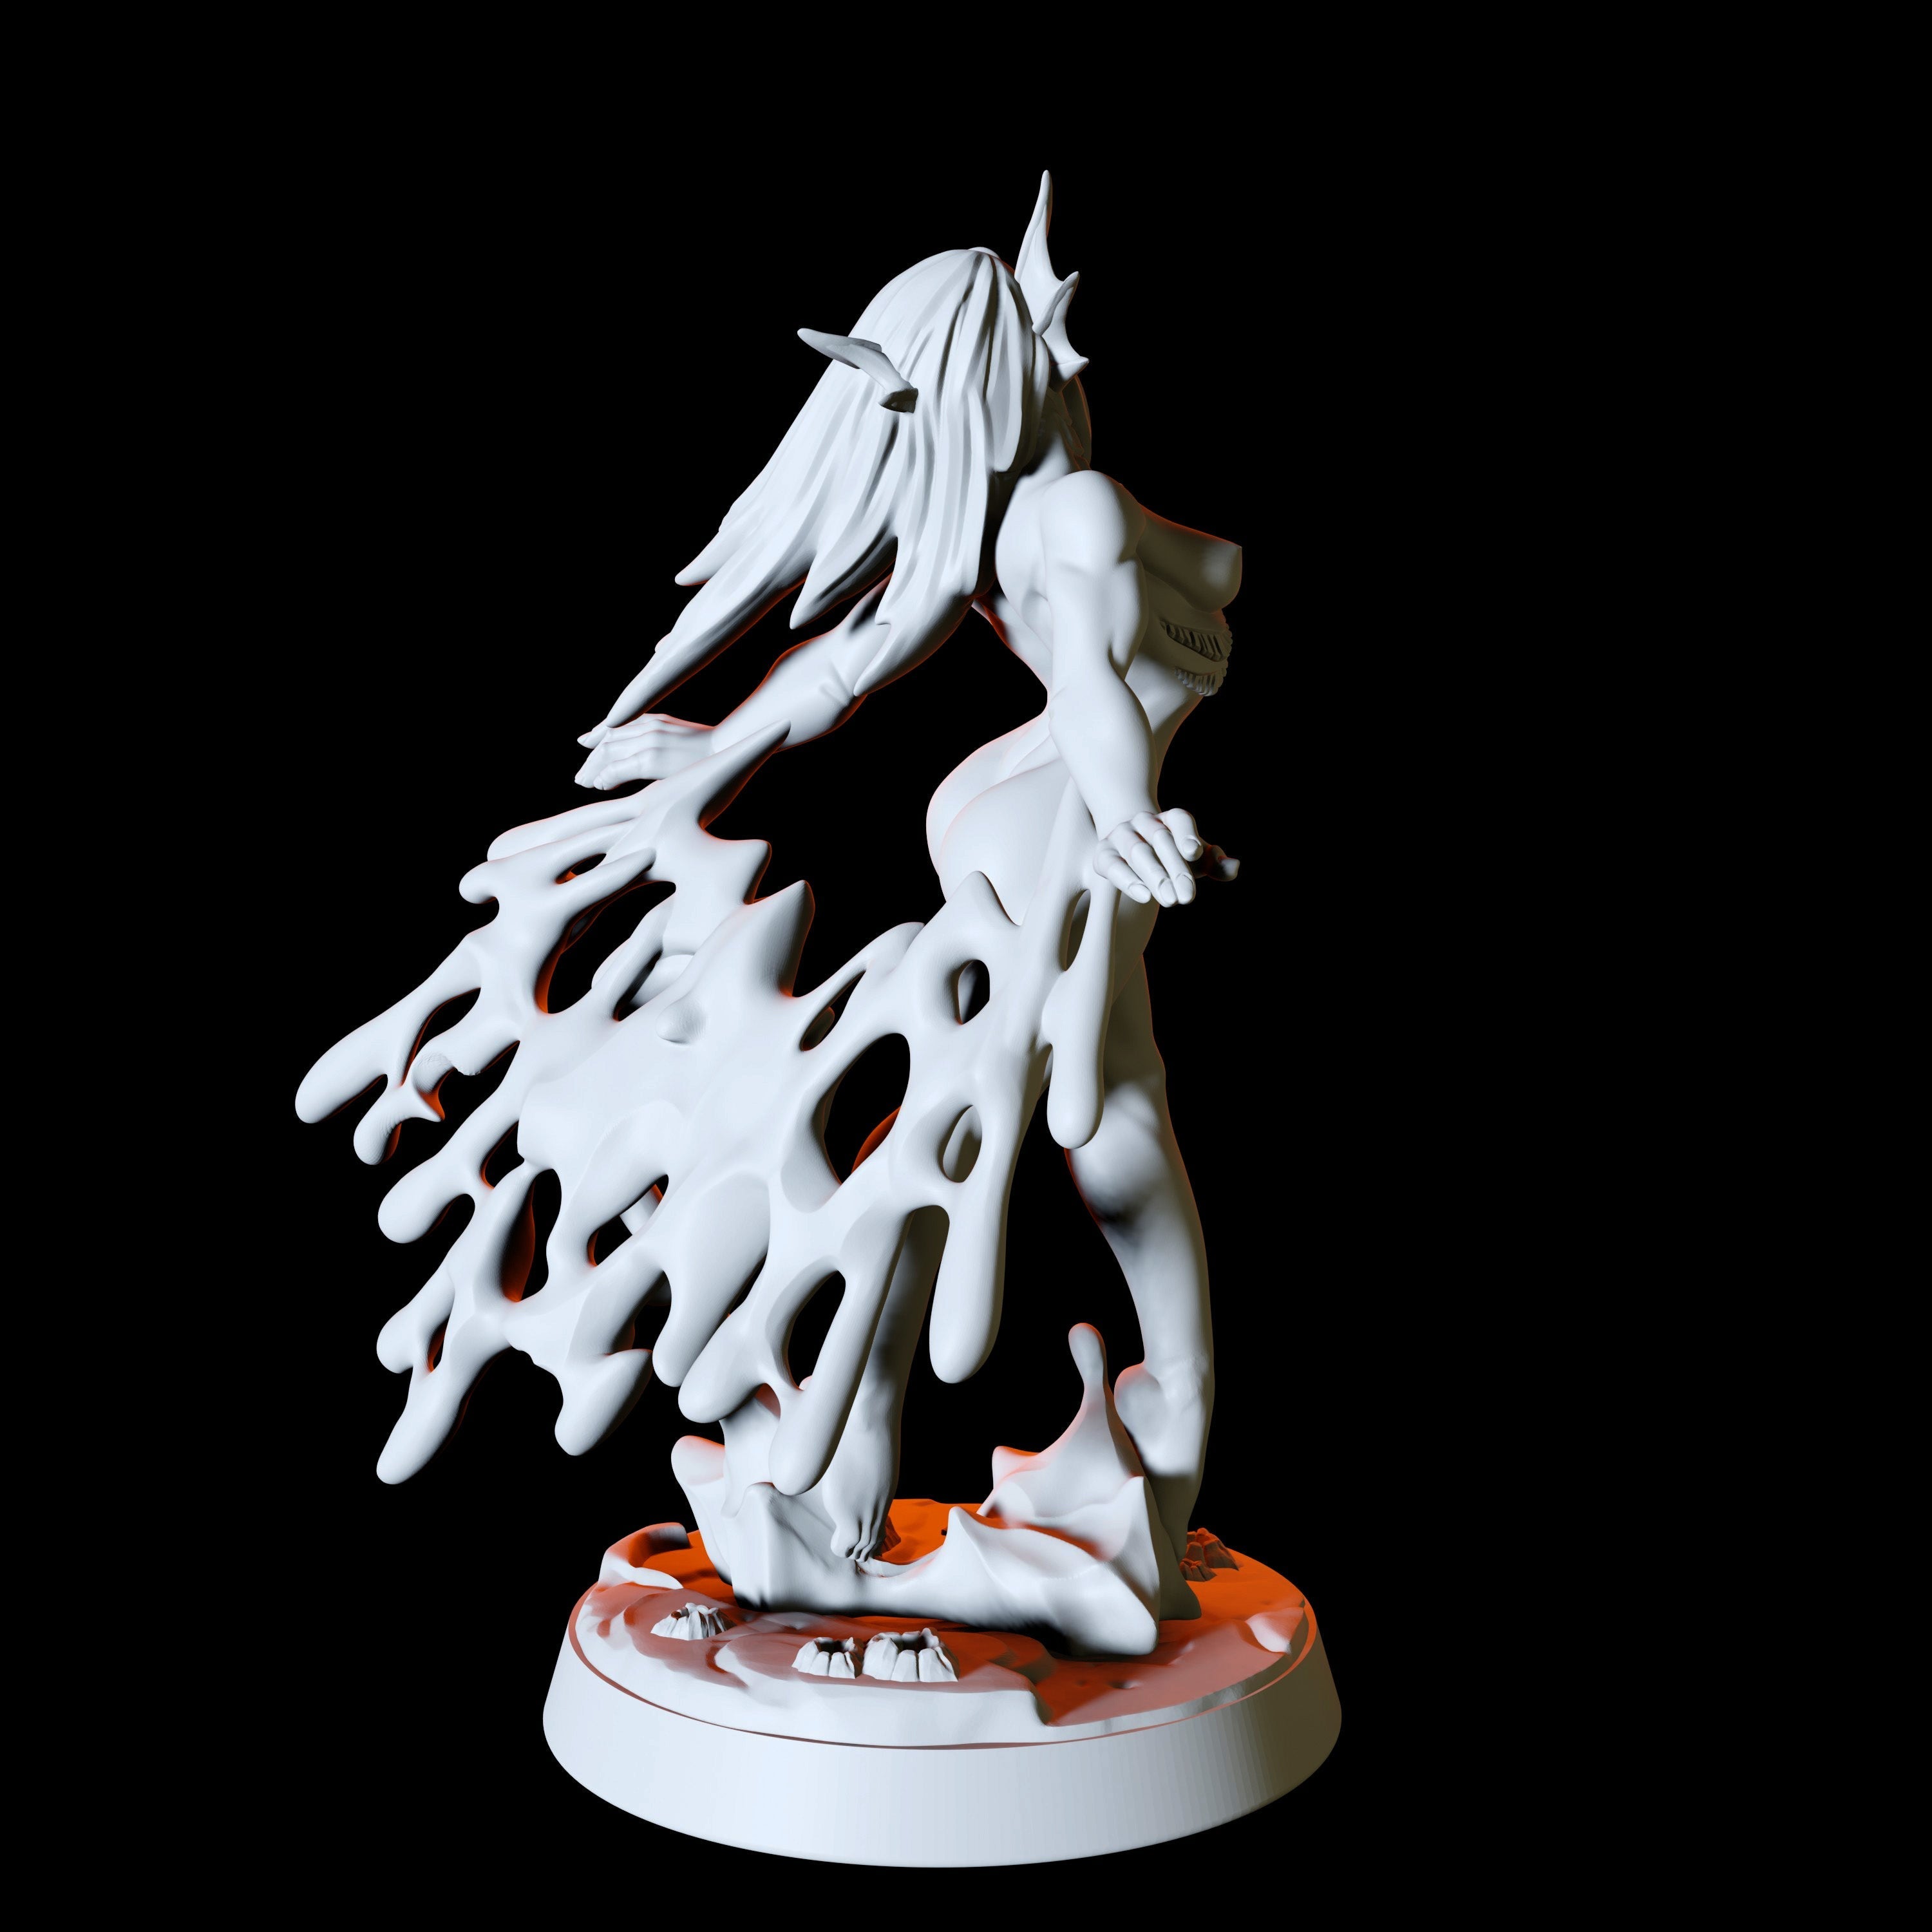 Sea Elf Pinup Miniature for Dungeons and Dragons - Myth Forged